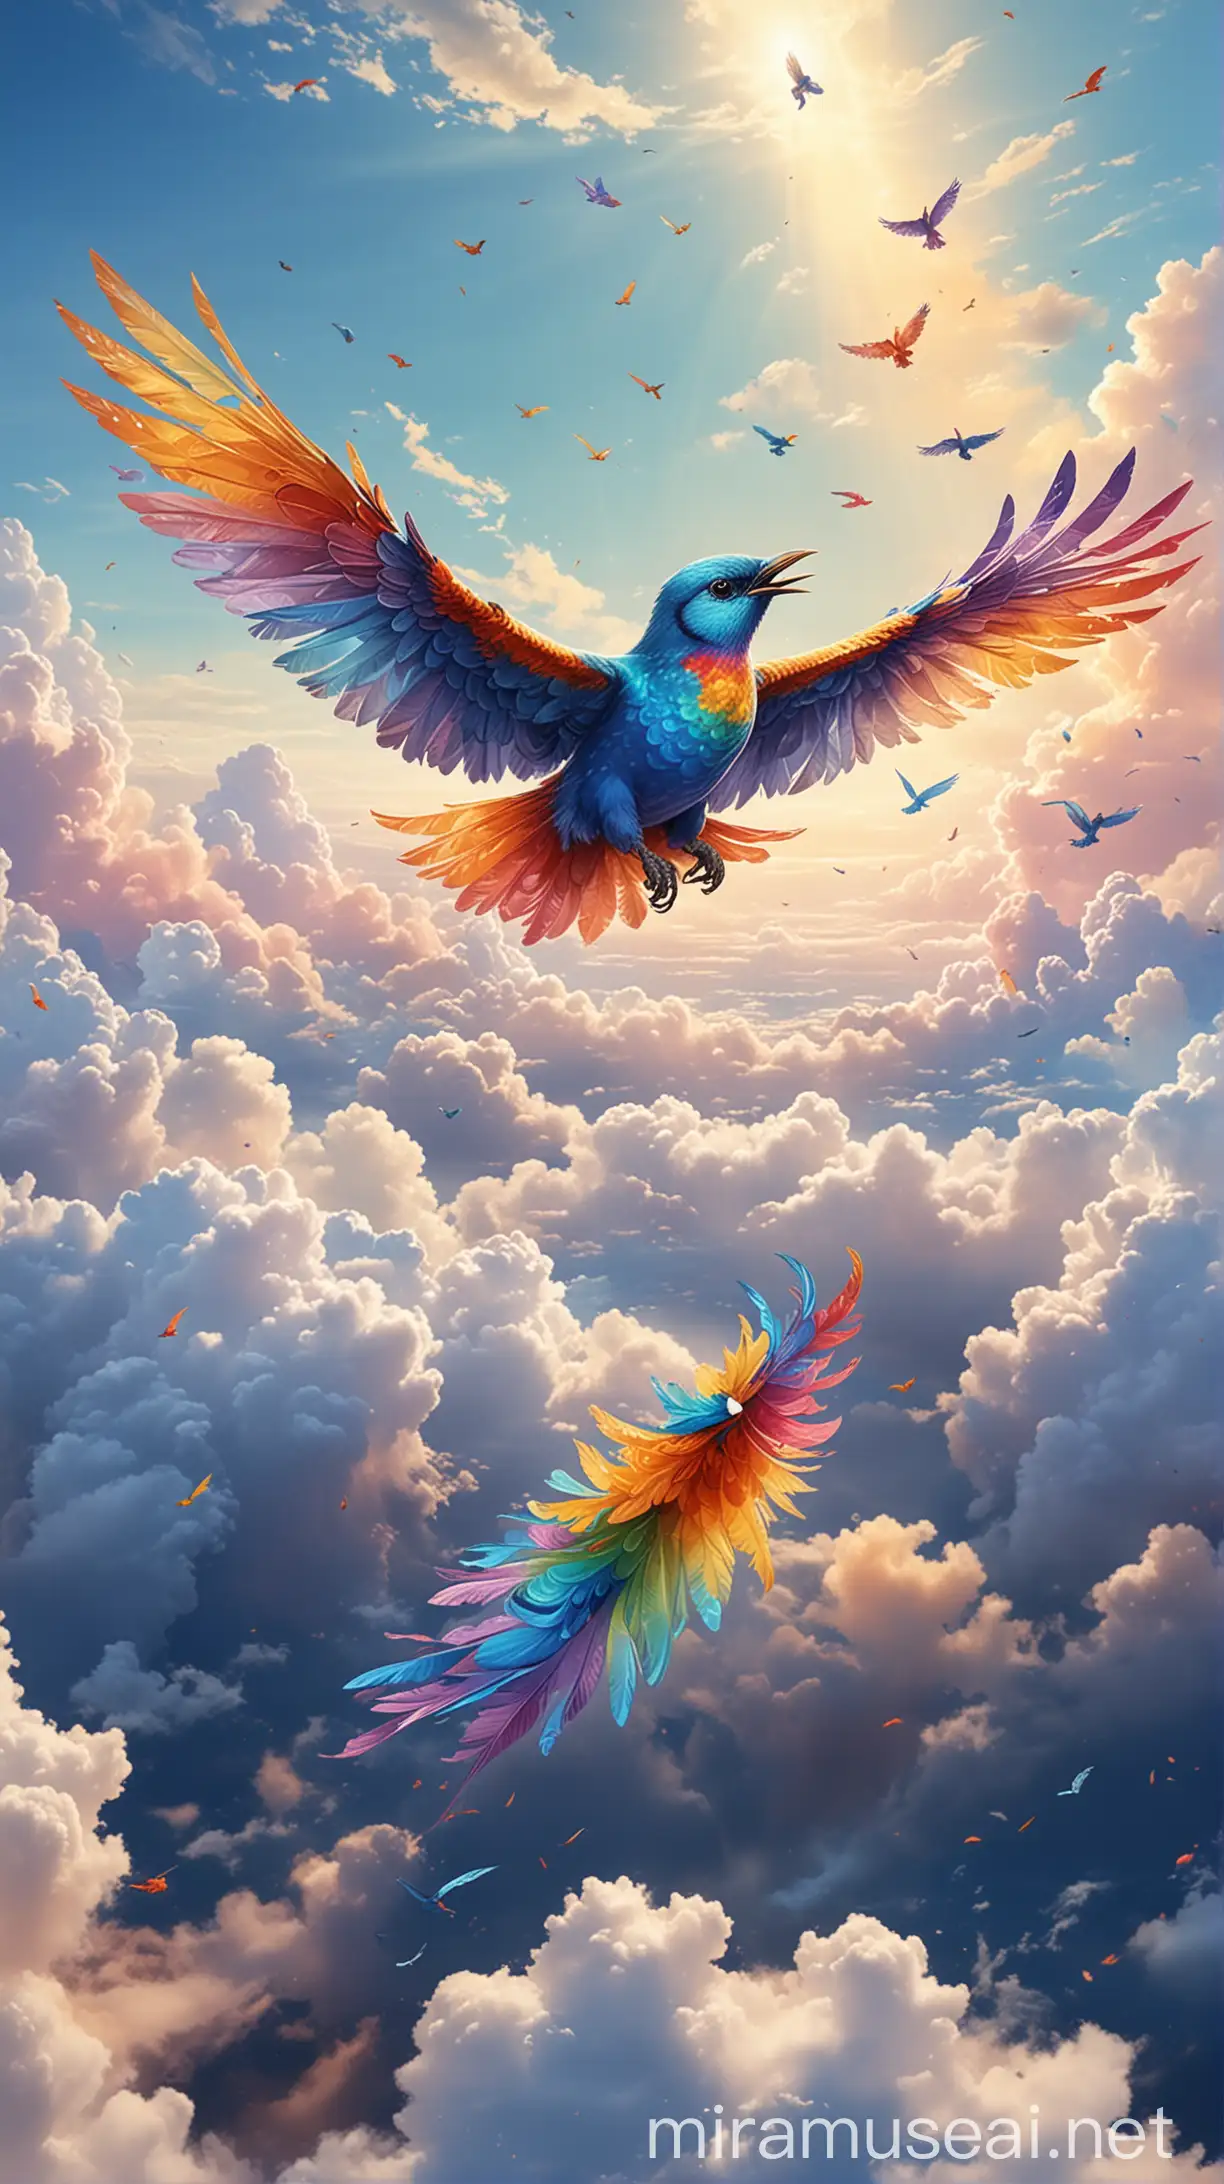 Imagine yourself as a colorful bird, flapping your wings with excitement as you soar high in the boundless sky, feeling the thrill of freedom.
 for kid 